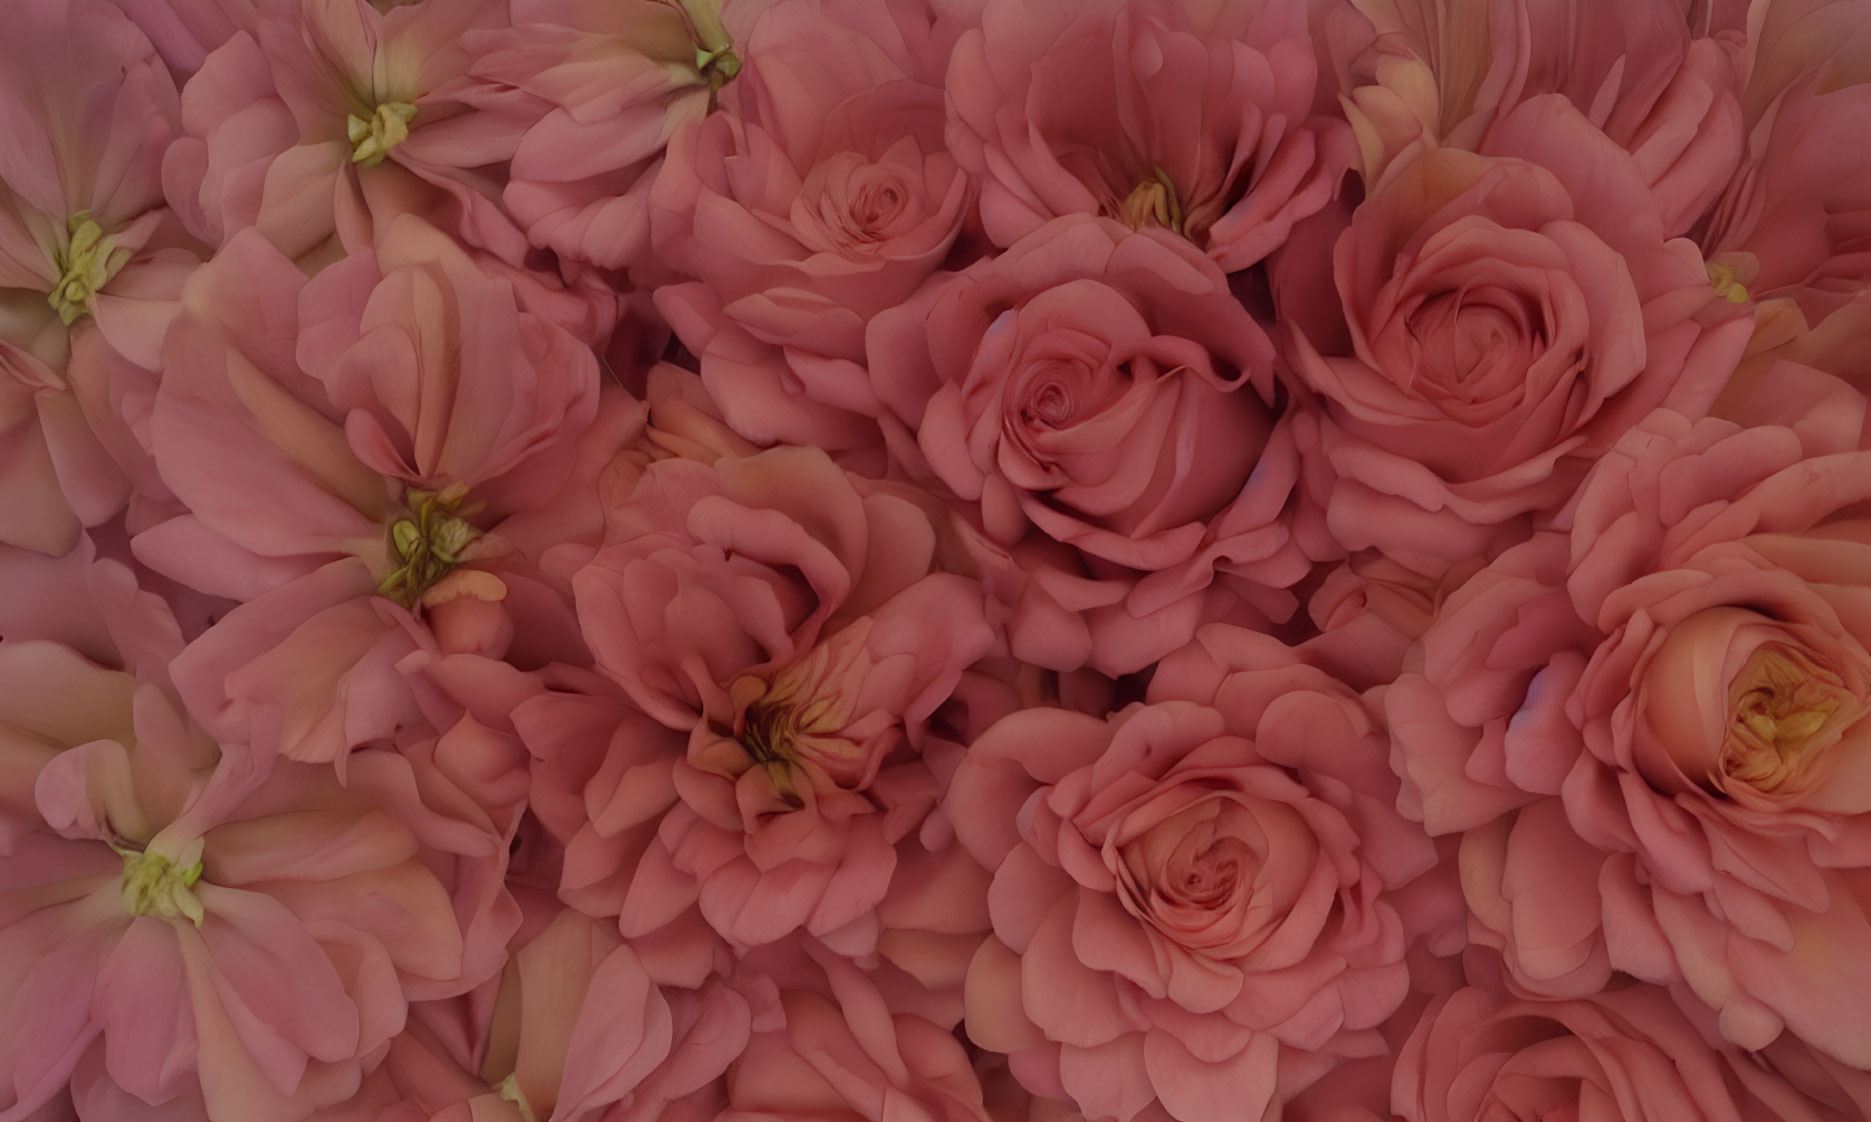 Soft Pink Roses and Buds Close-Up for Lush Floral Background